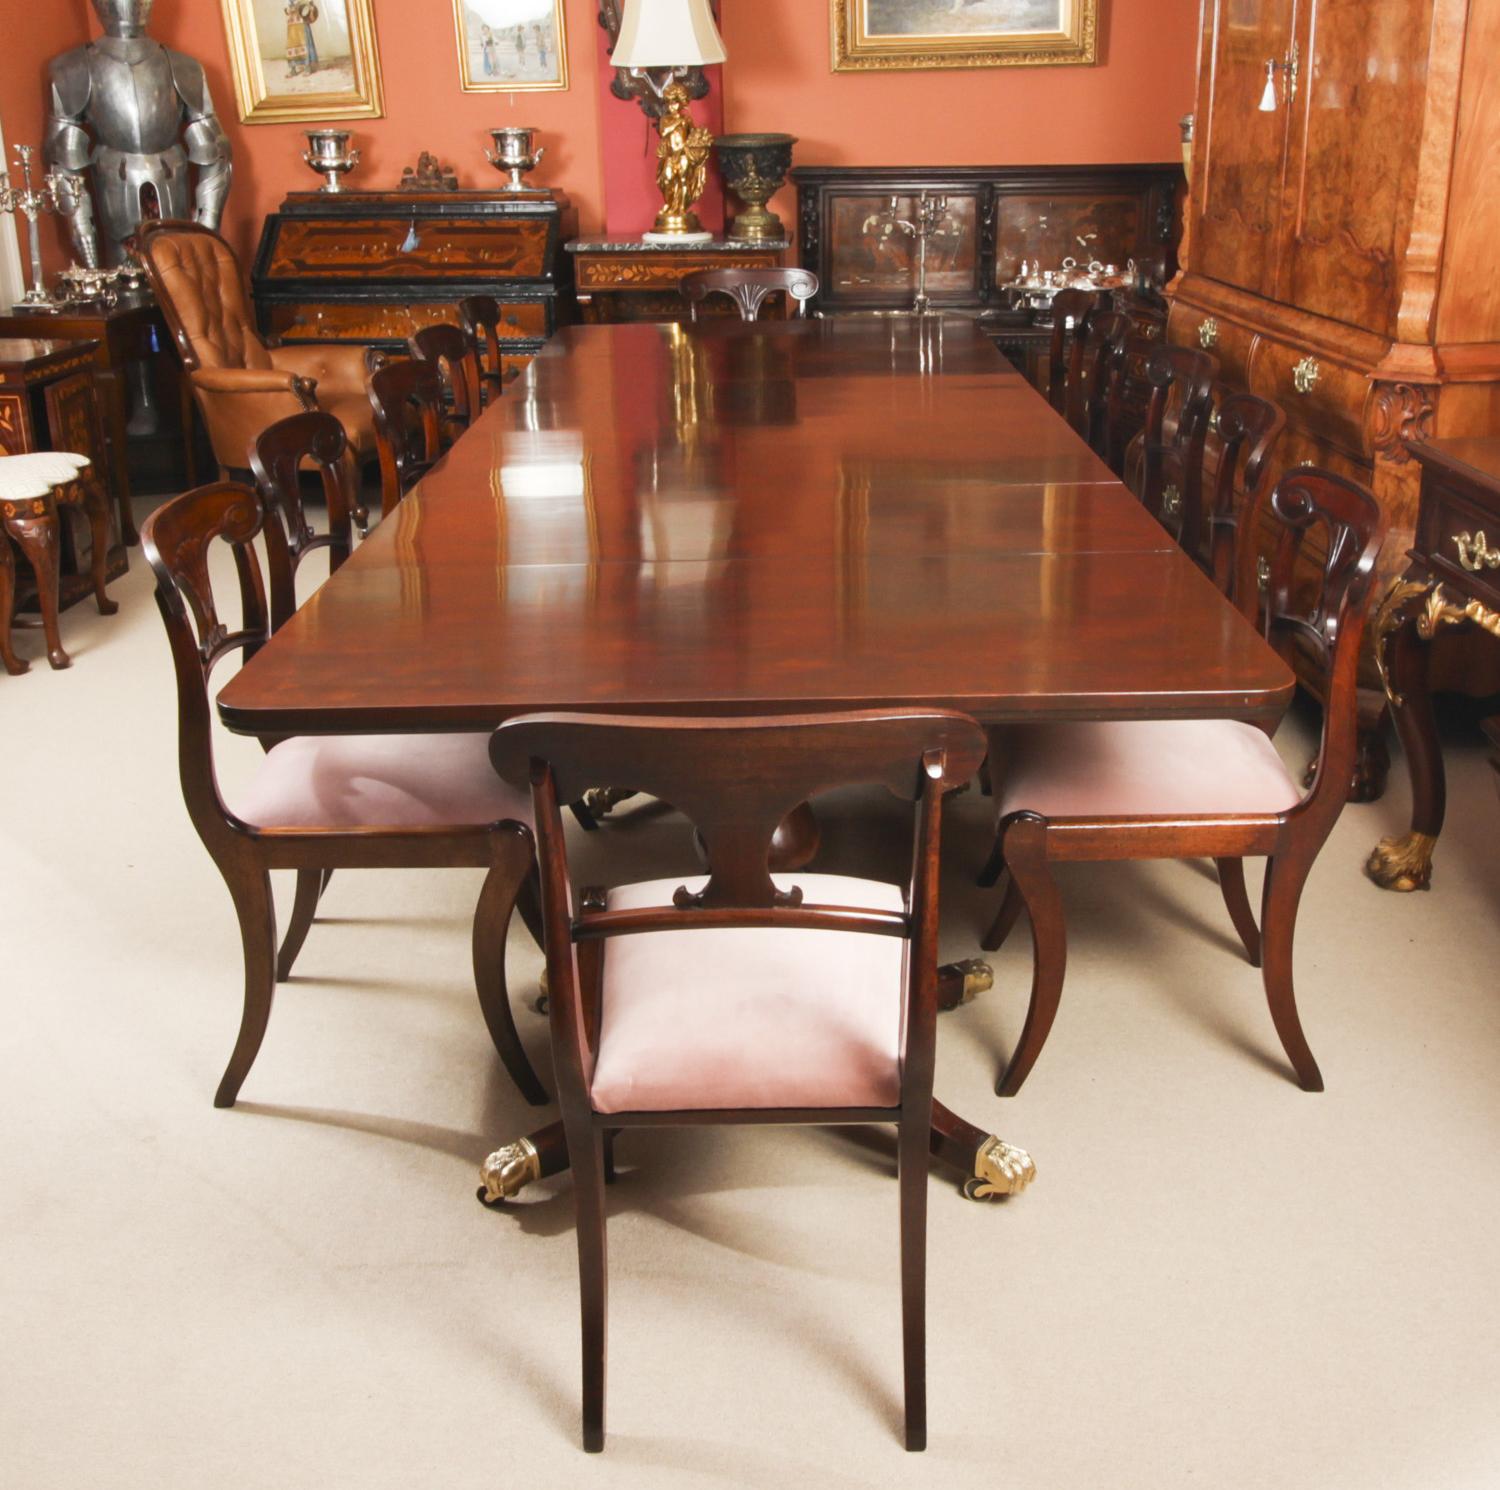 This is an elegant dining set comprising an antique George III Regency Period dining table with a fabulous set of twelve antique Regency dining chairs, all Circa 1820 in date.

The elegant antique George III Regency triple pedestal dining table